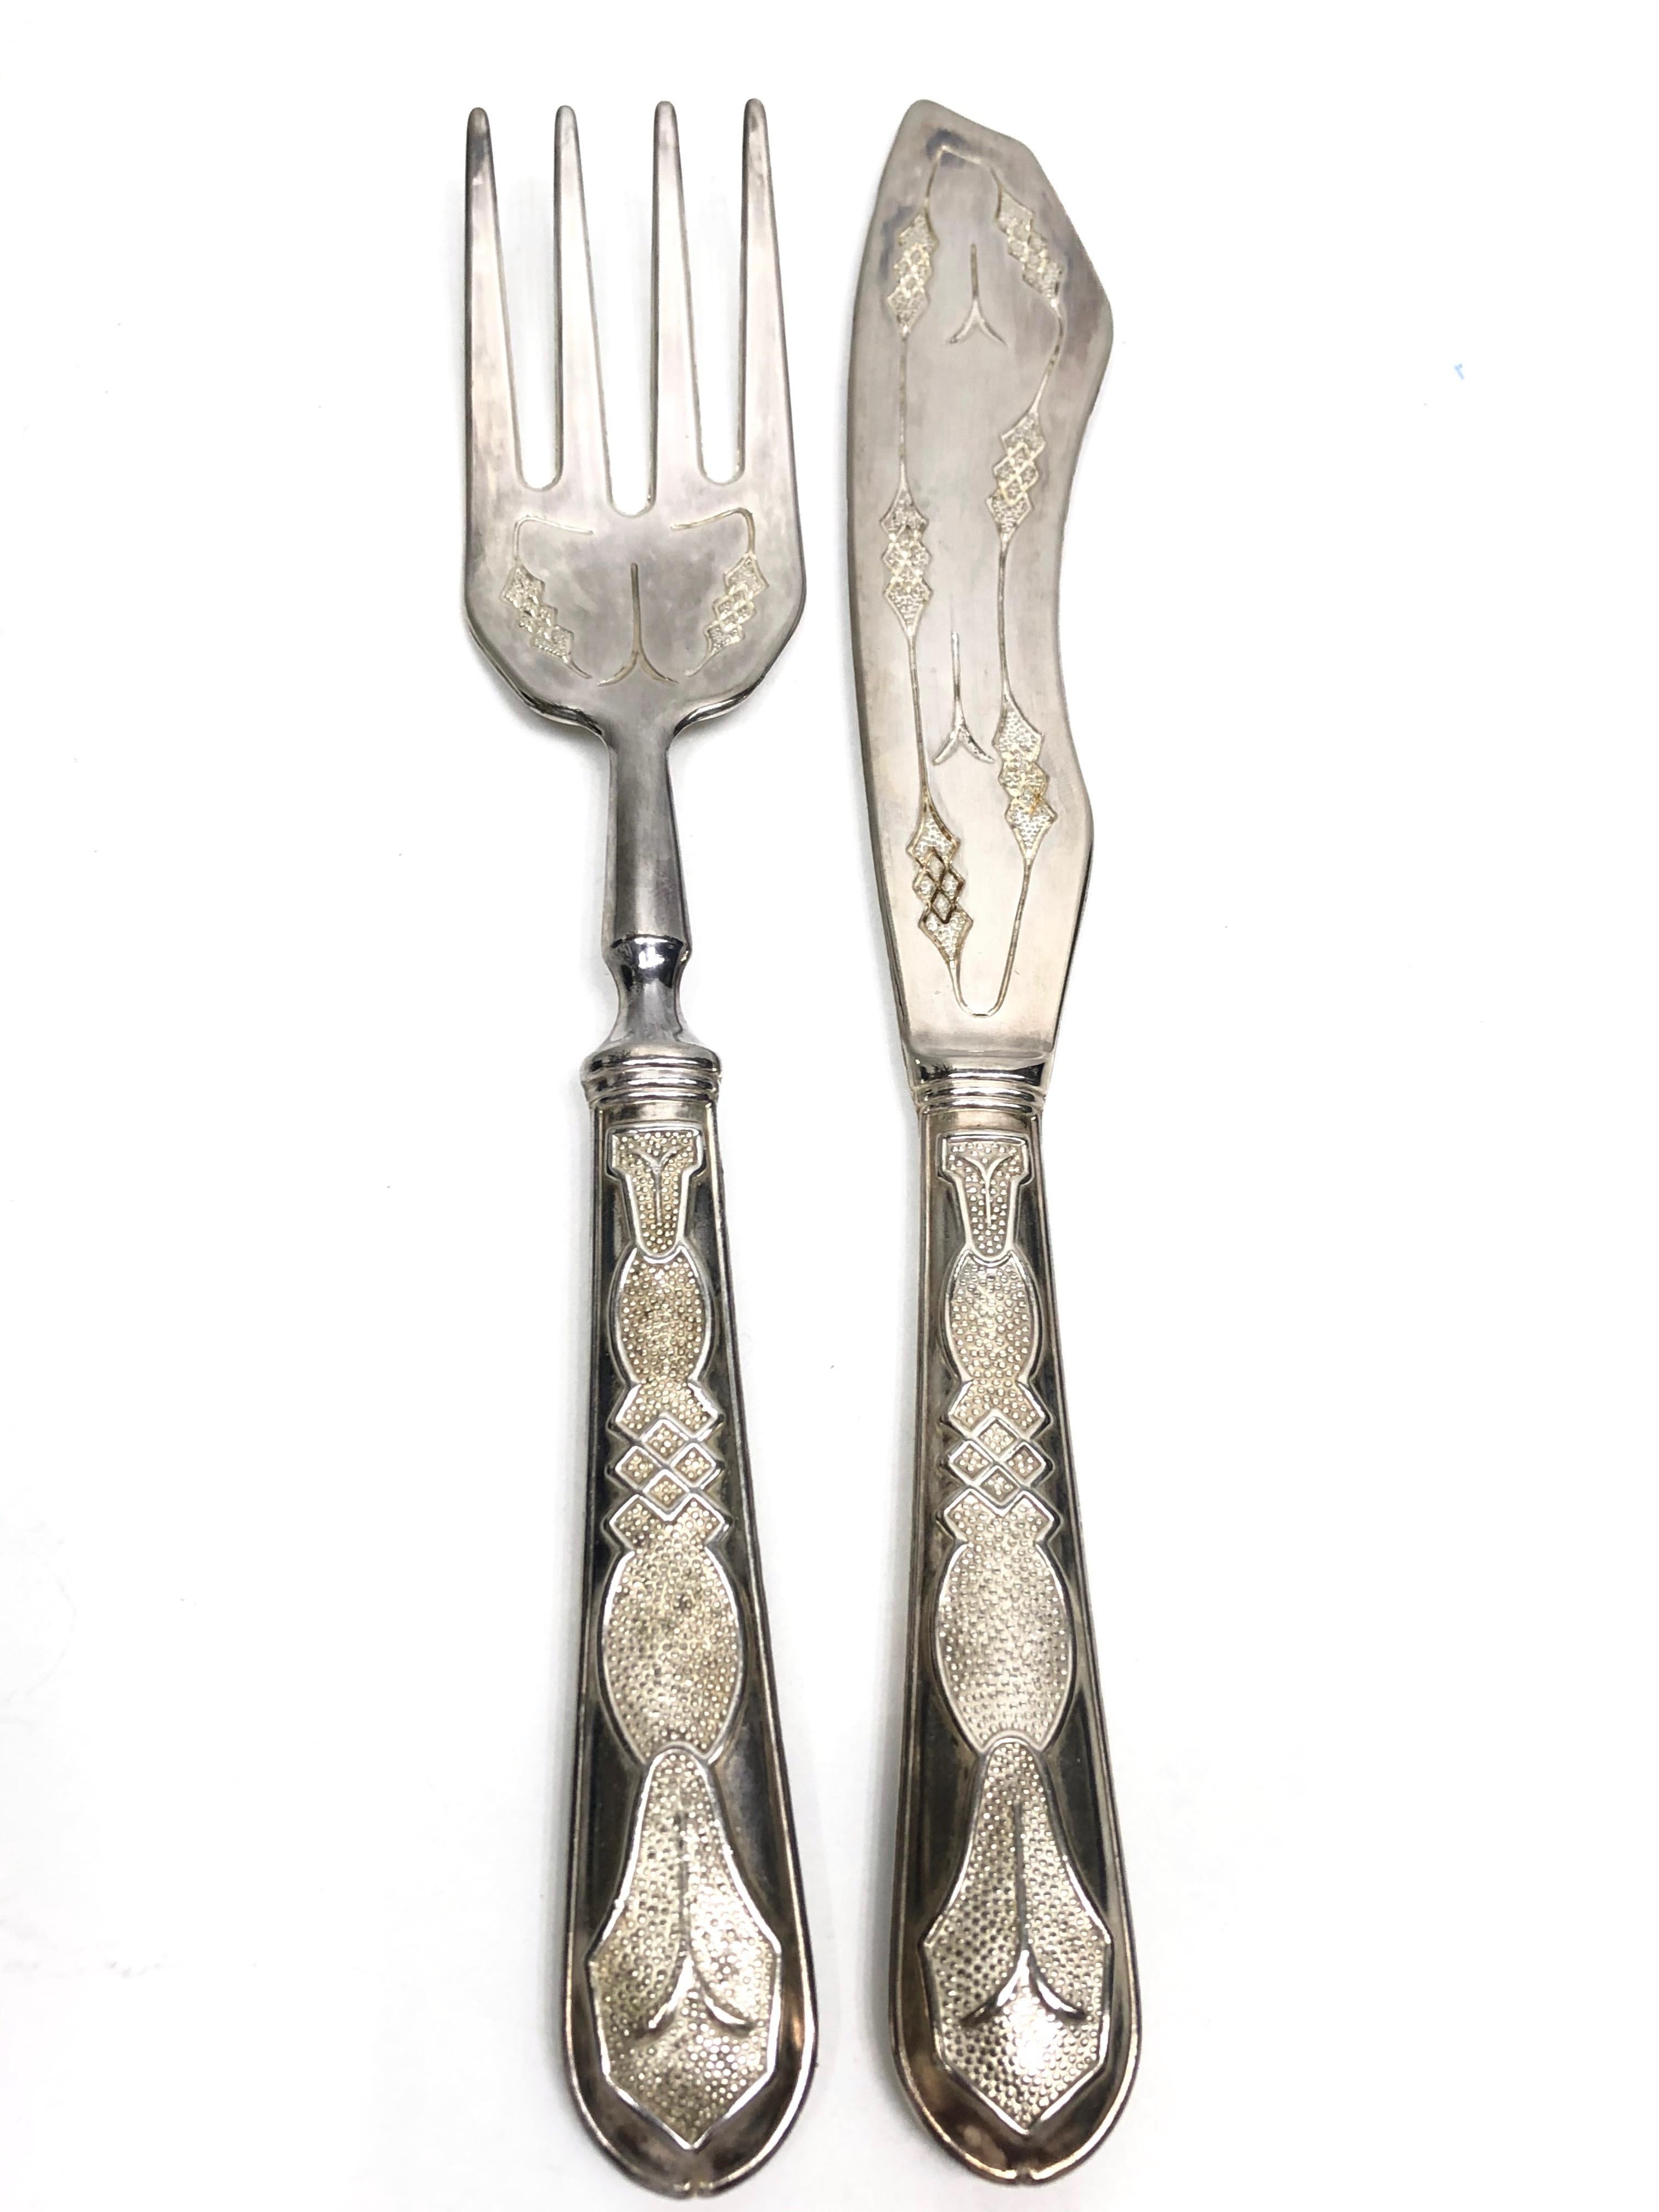 A beautiful Art Nouveau fish servers serving set of a fork & knife, vintage Sweden. These serving pieces as in a rare and antique design. Made of 800 silver, it will make a nice addition to any table. Knife measures approximate 9 5/8